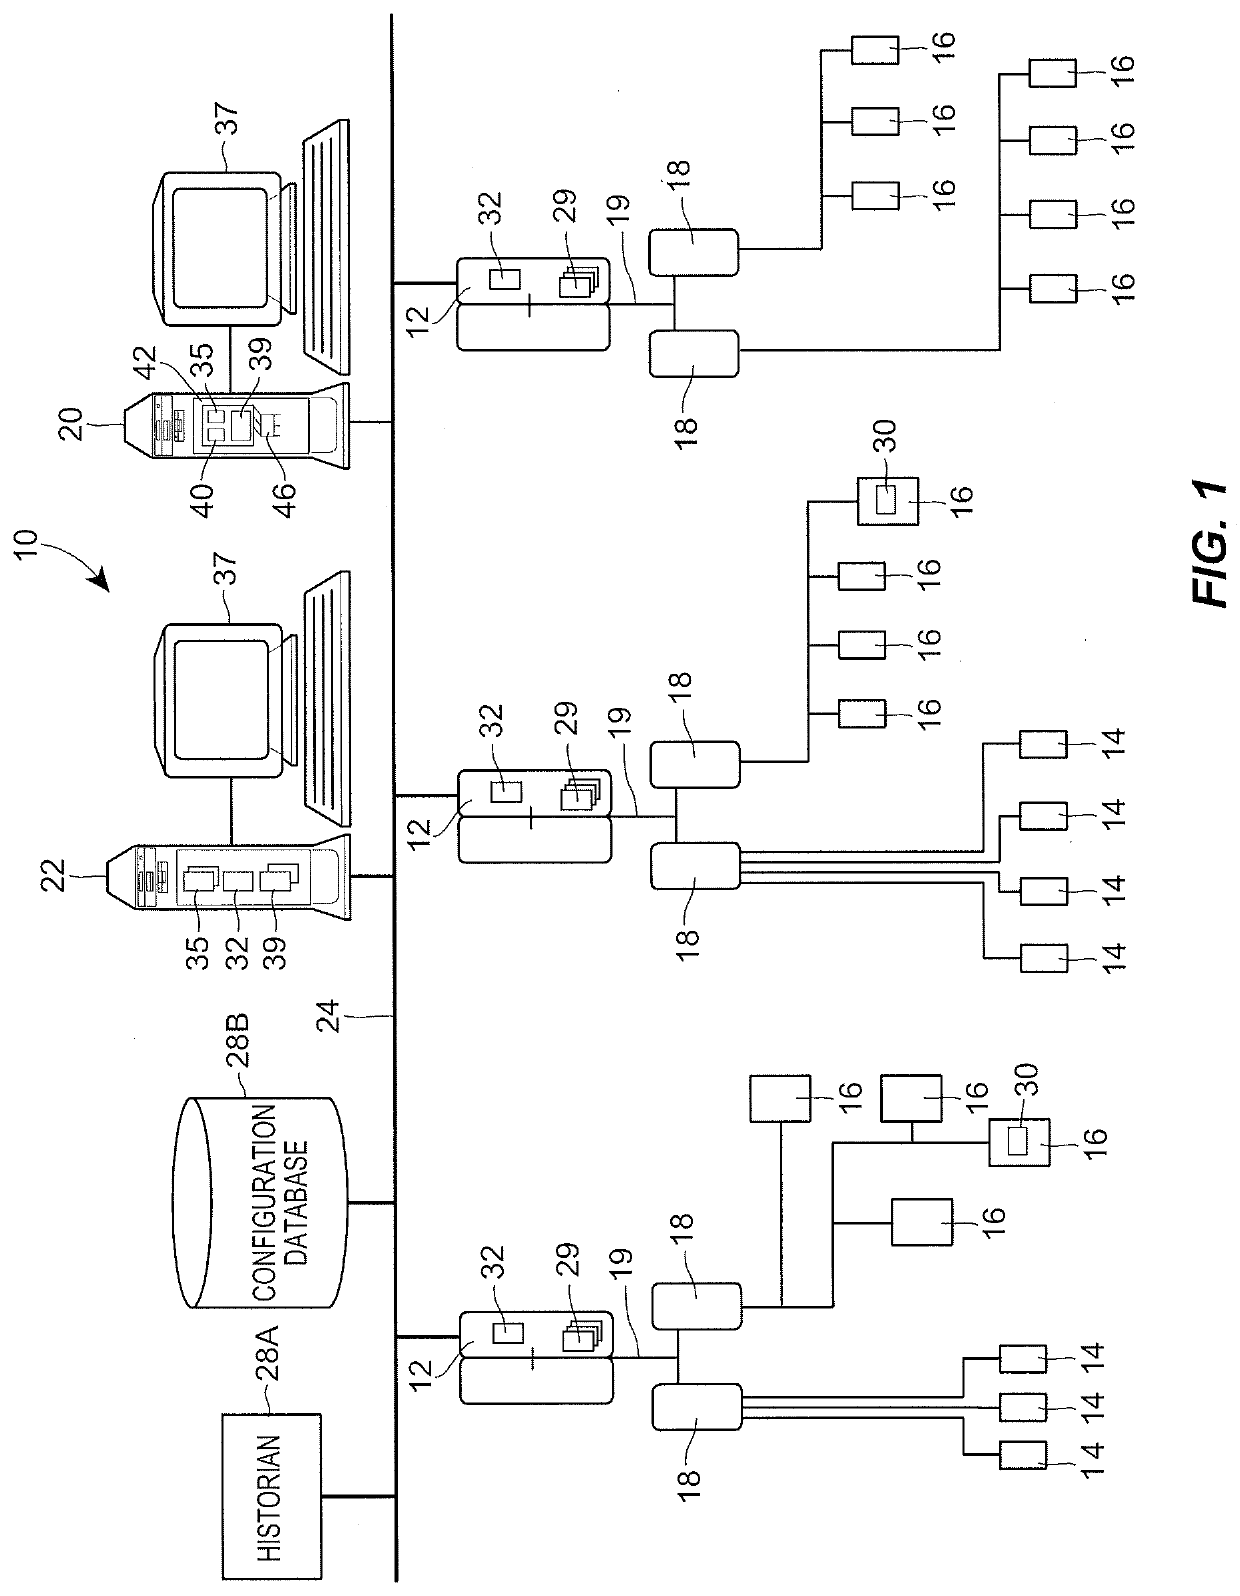 Real-Time Control Using Directed Predictive Simulation Within a Control System of a Process Plant